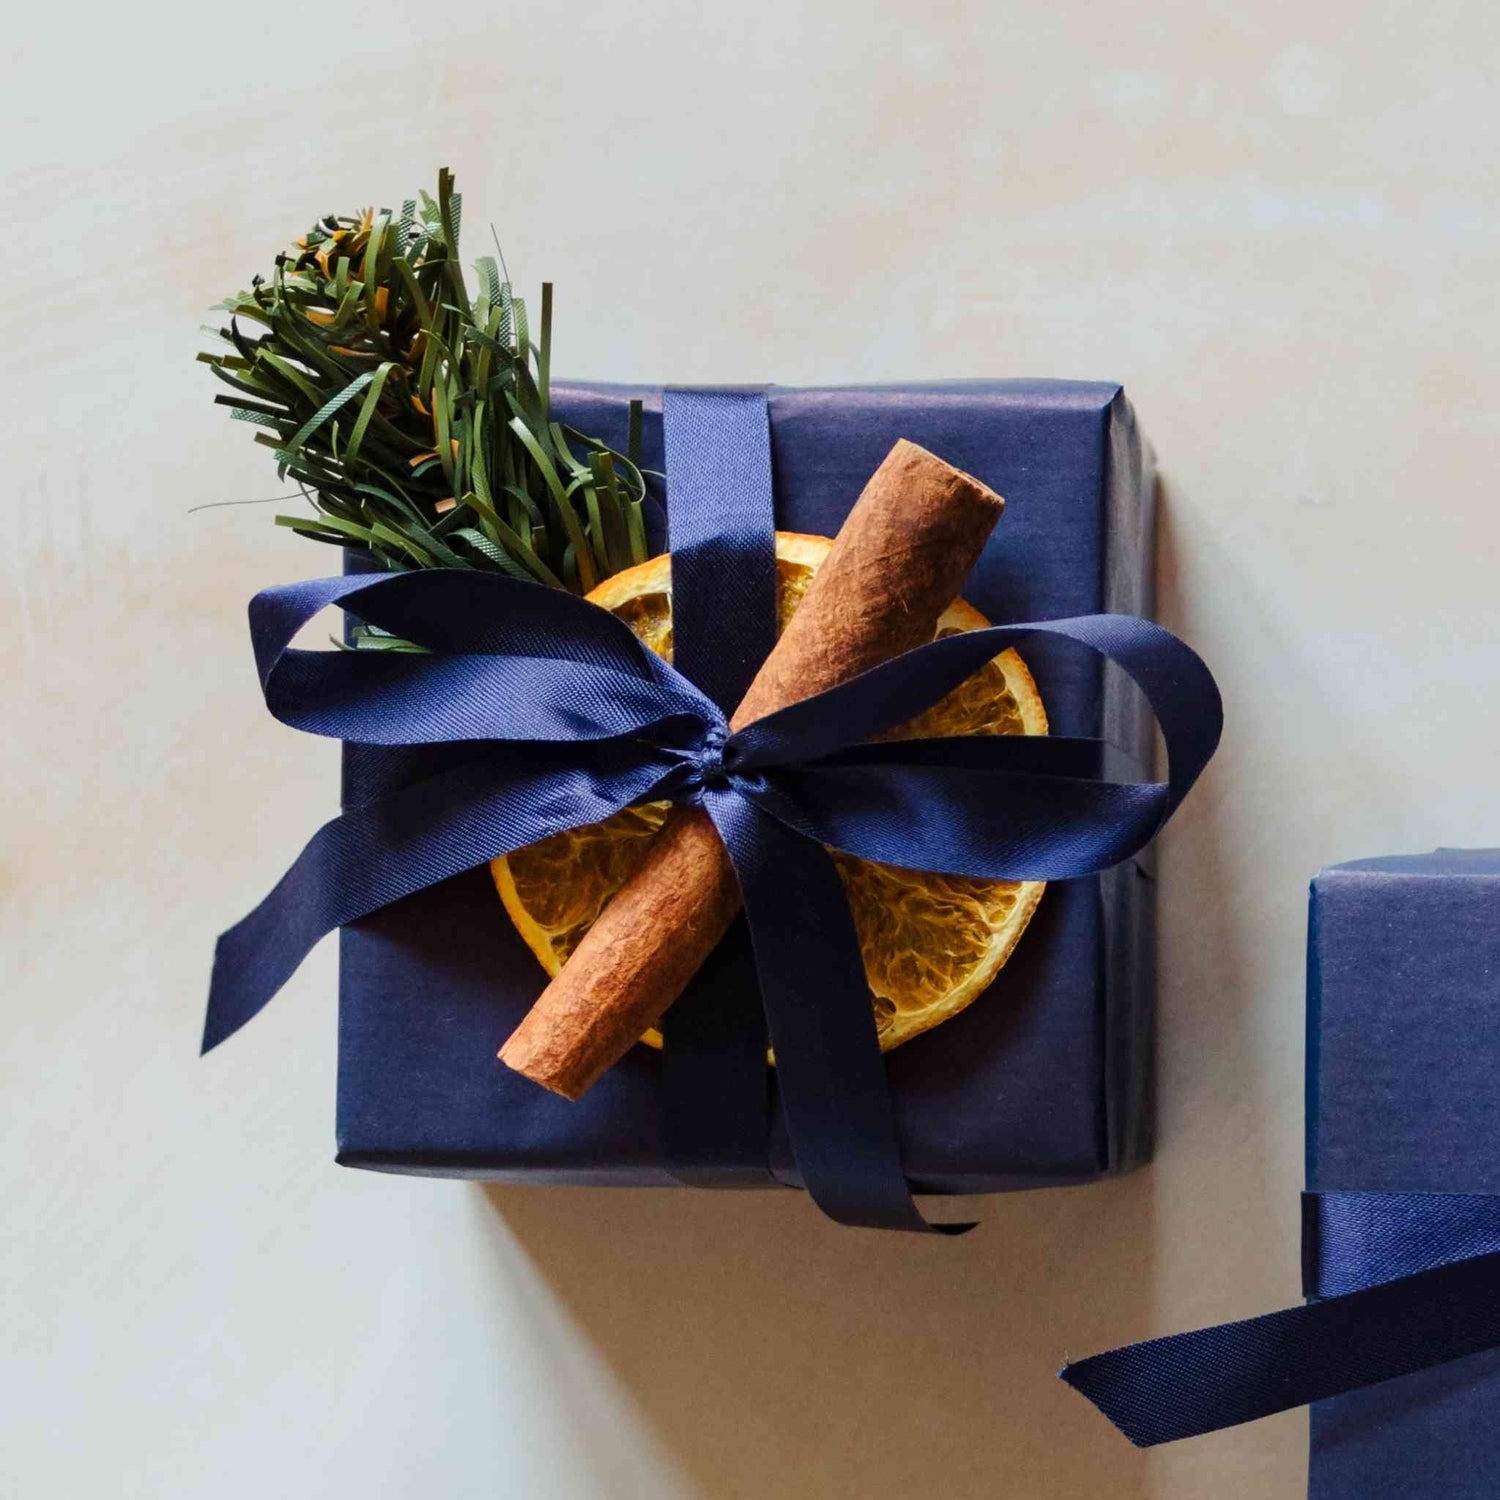 A whiskey scented 200g soy candle from the Home County Co. is shown with luxury Christmas Gift Wrap. The candle is wrapped in luxury navy wrapping paper secured with navy ribbon and Christmas embellishments.